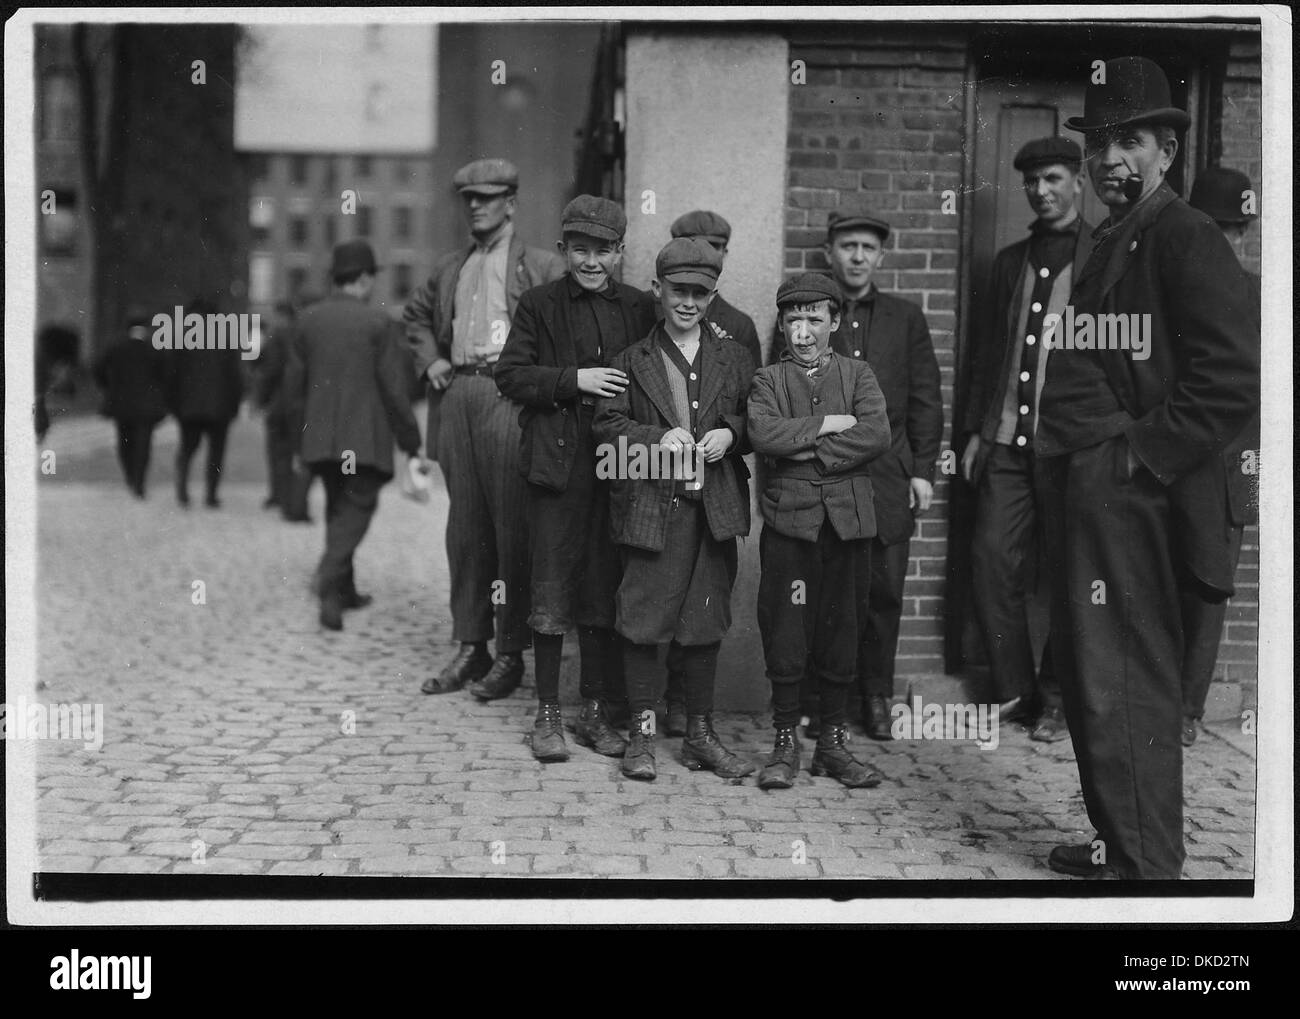 Workers in Merrimac Mill. Robert, smallest, 12 years old. Michael Keefe, next in size, about 13 or 14 years old.... 523483 Stock Photo